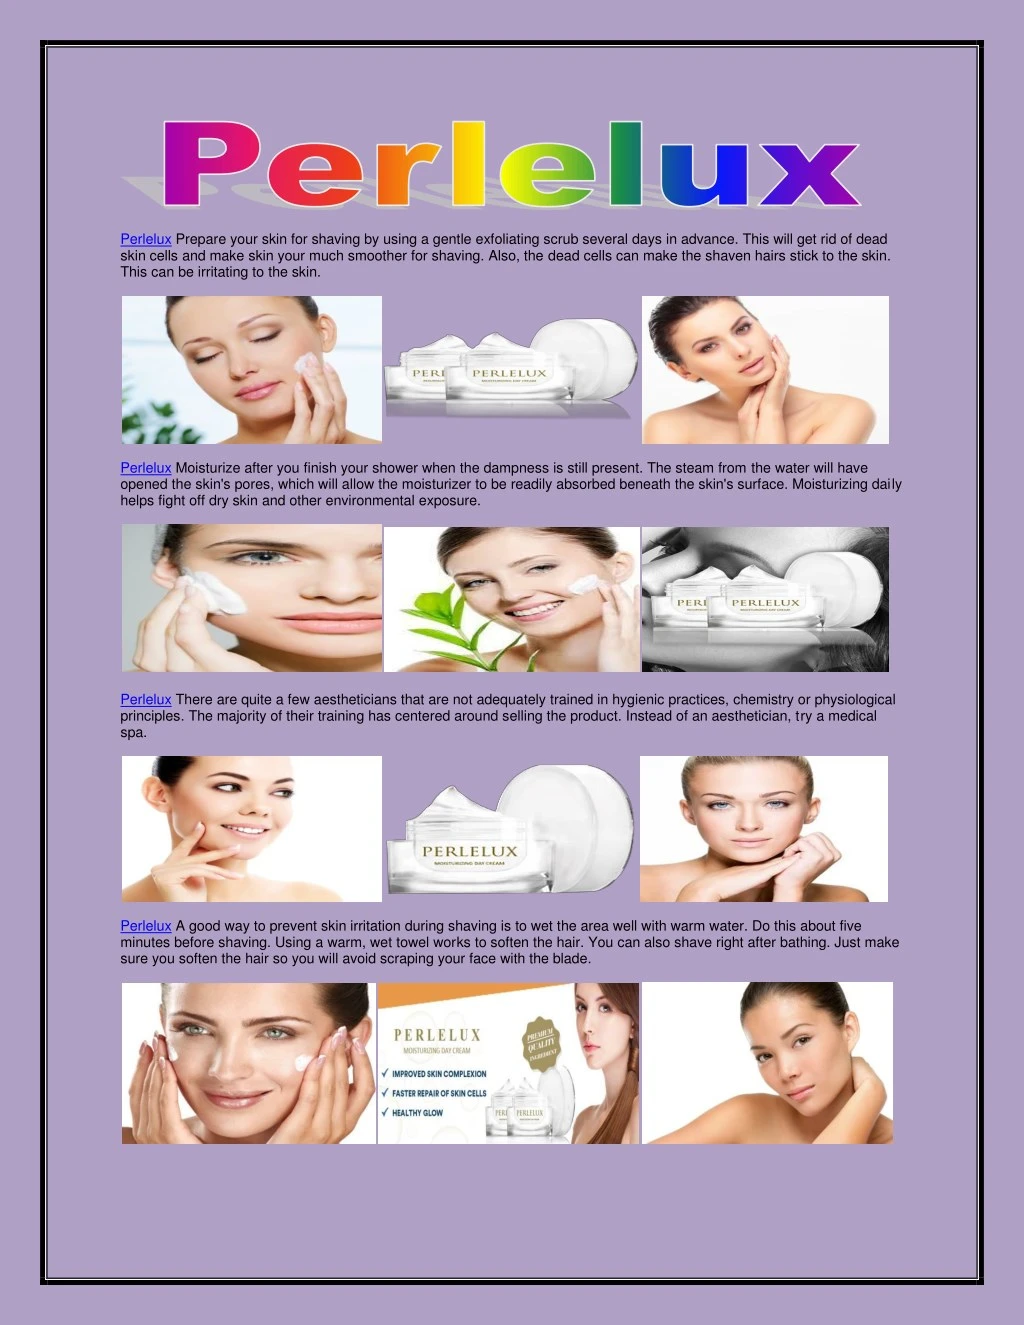 perlelux prepare your skin for shaving by using